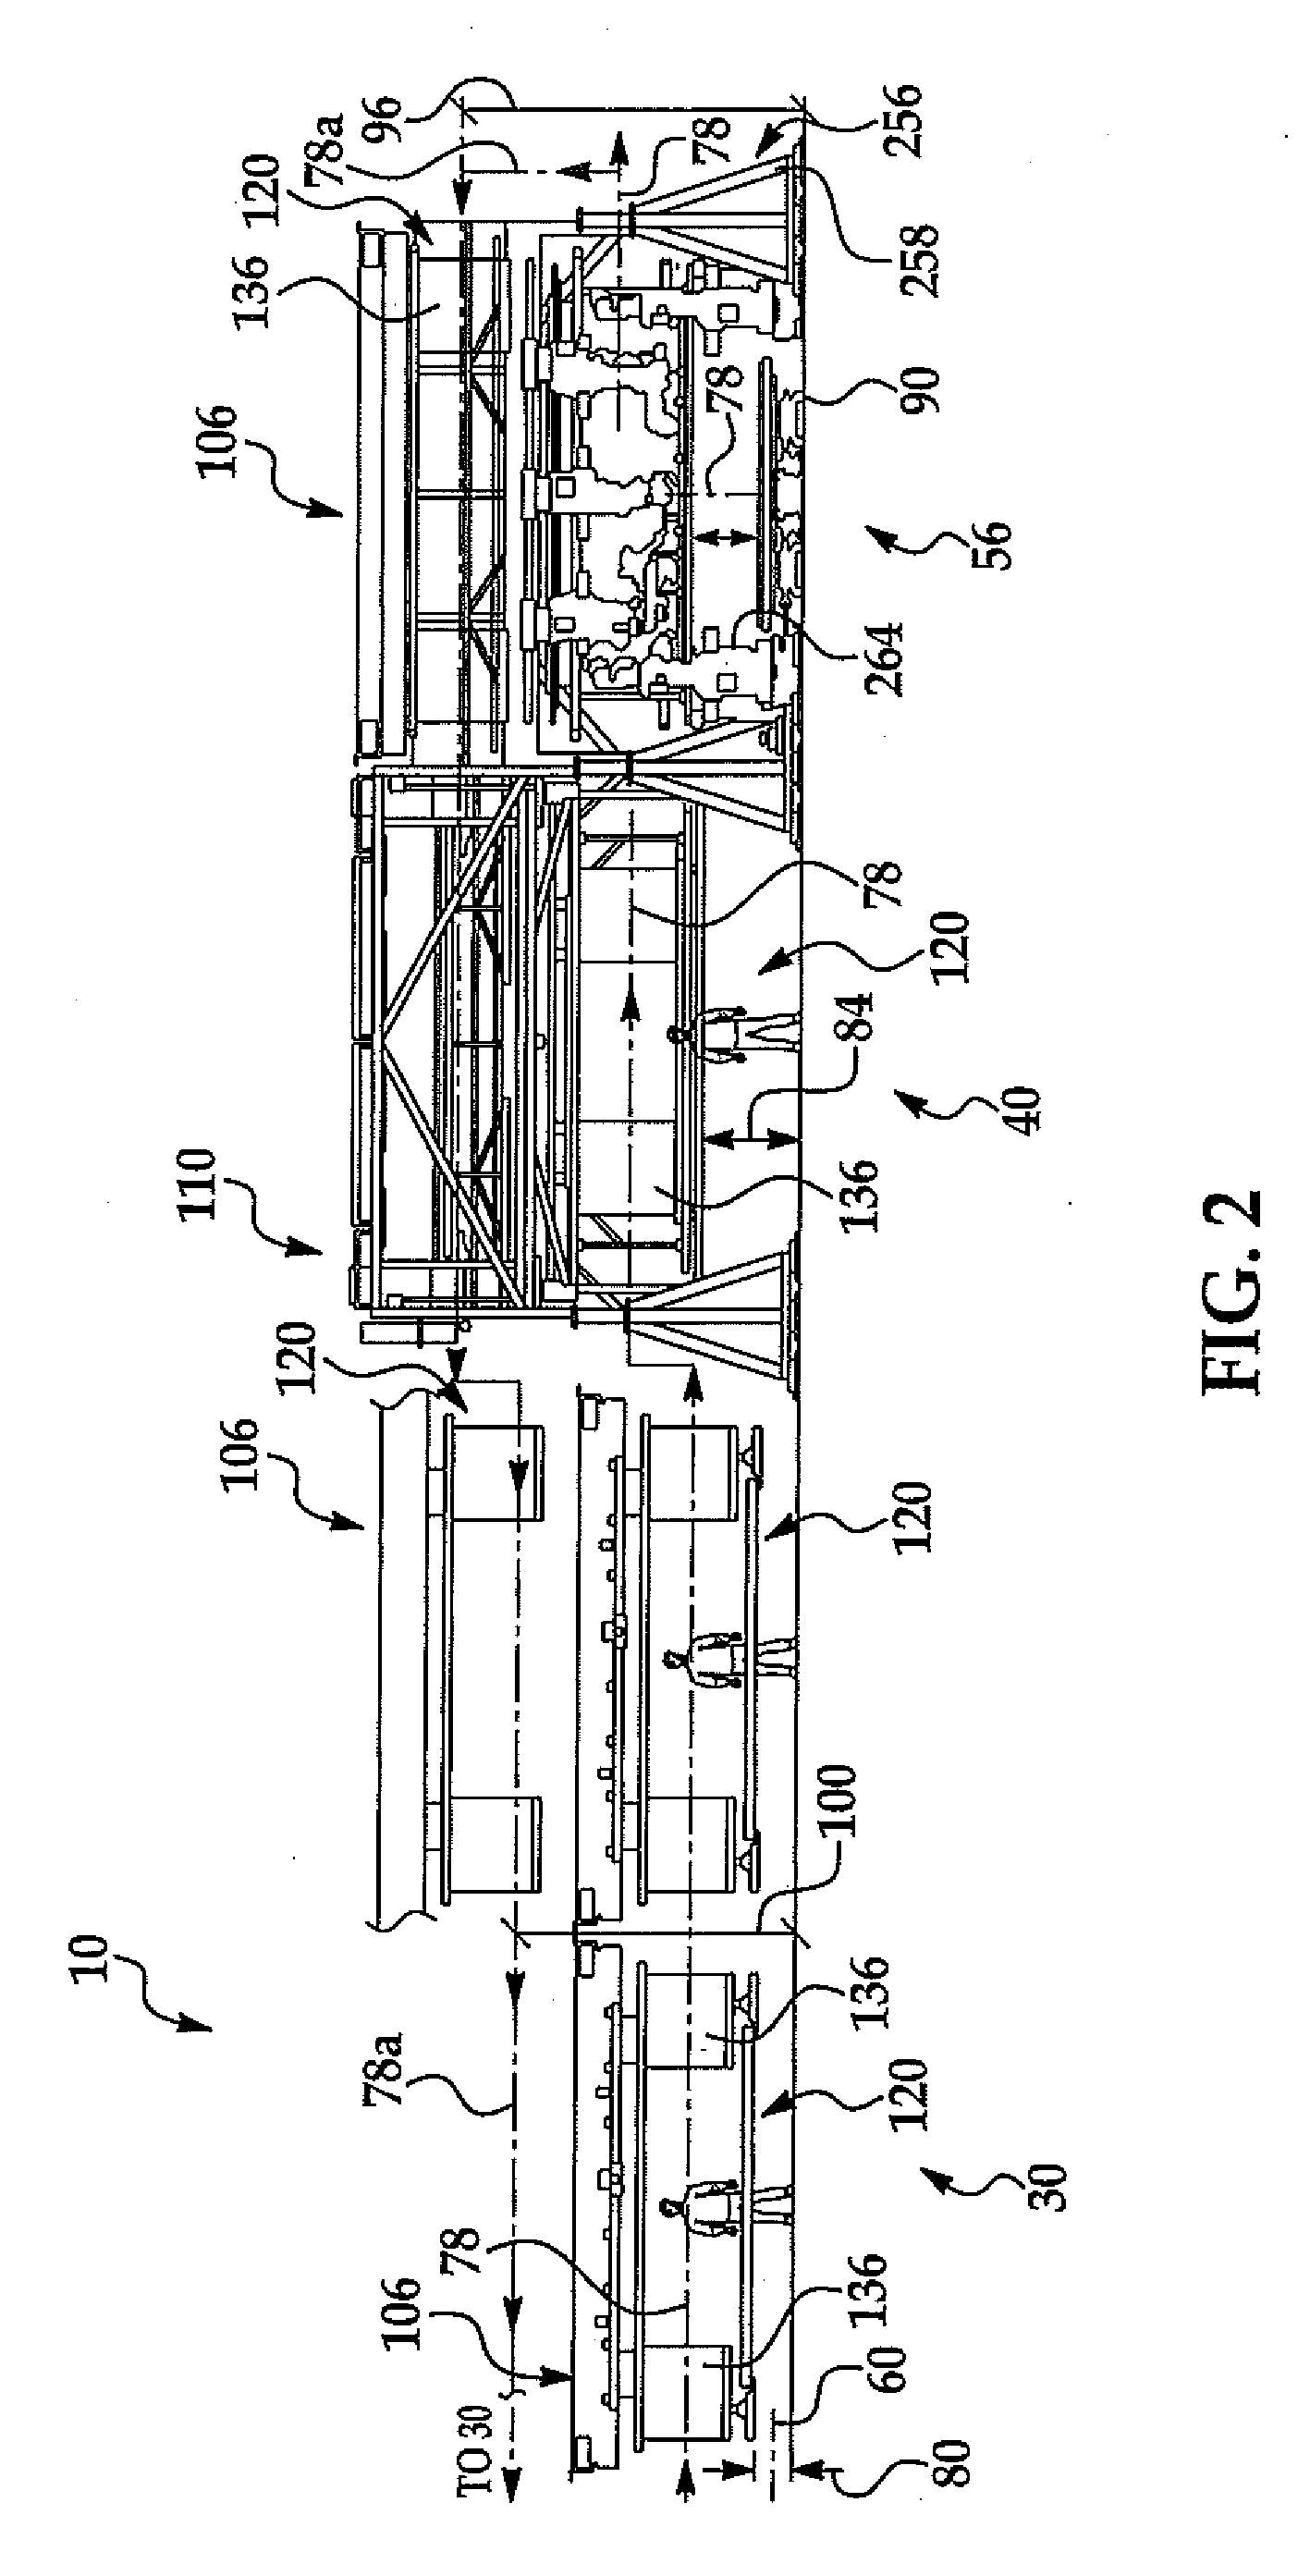 Integrated vehicle part delivery and build system